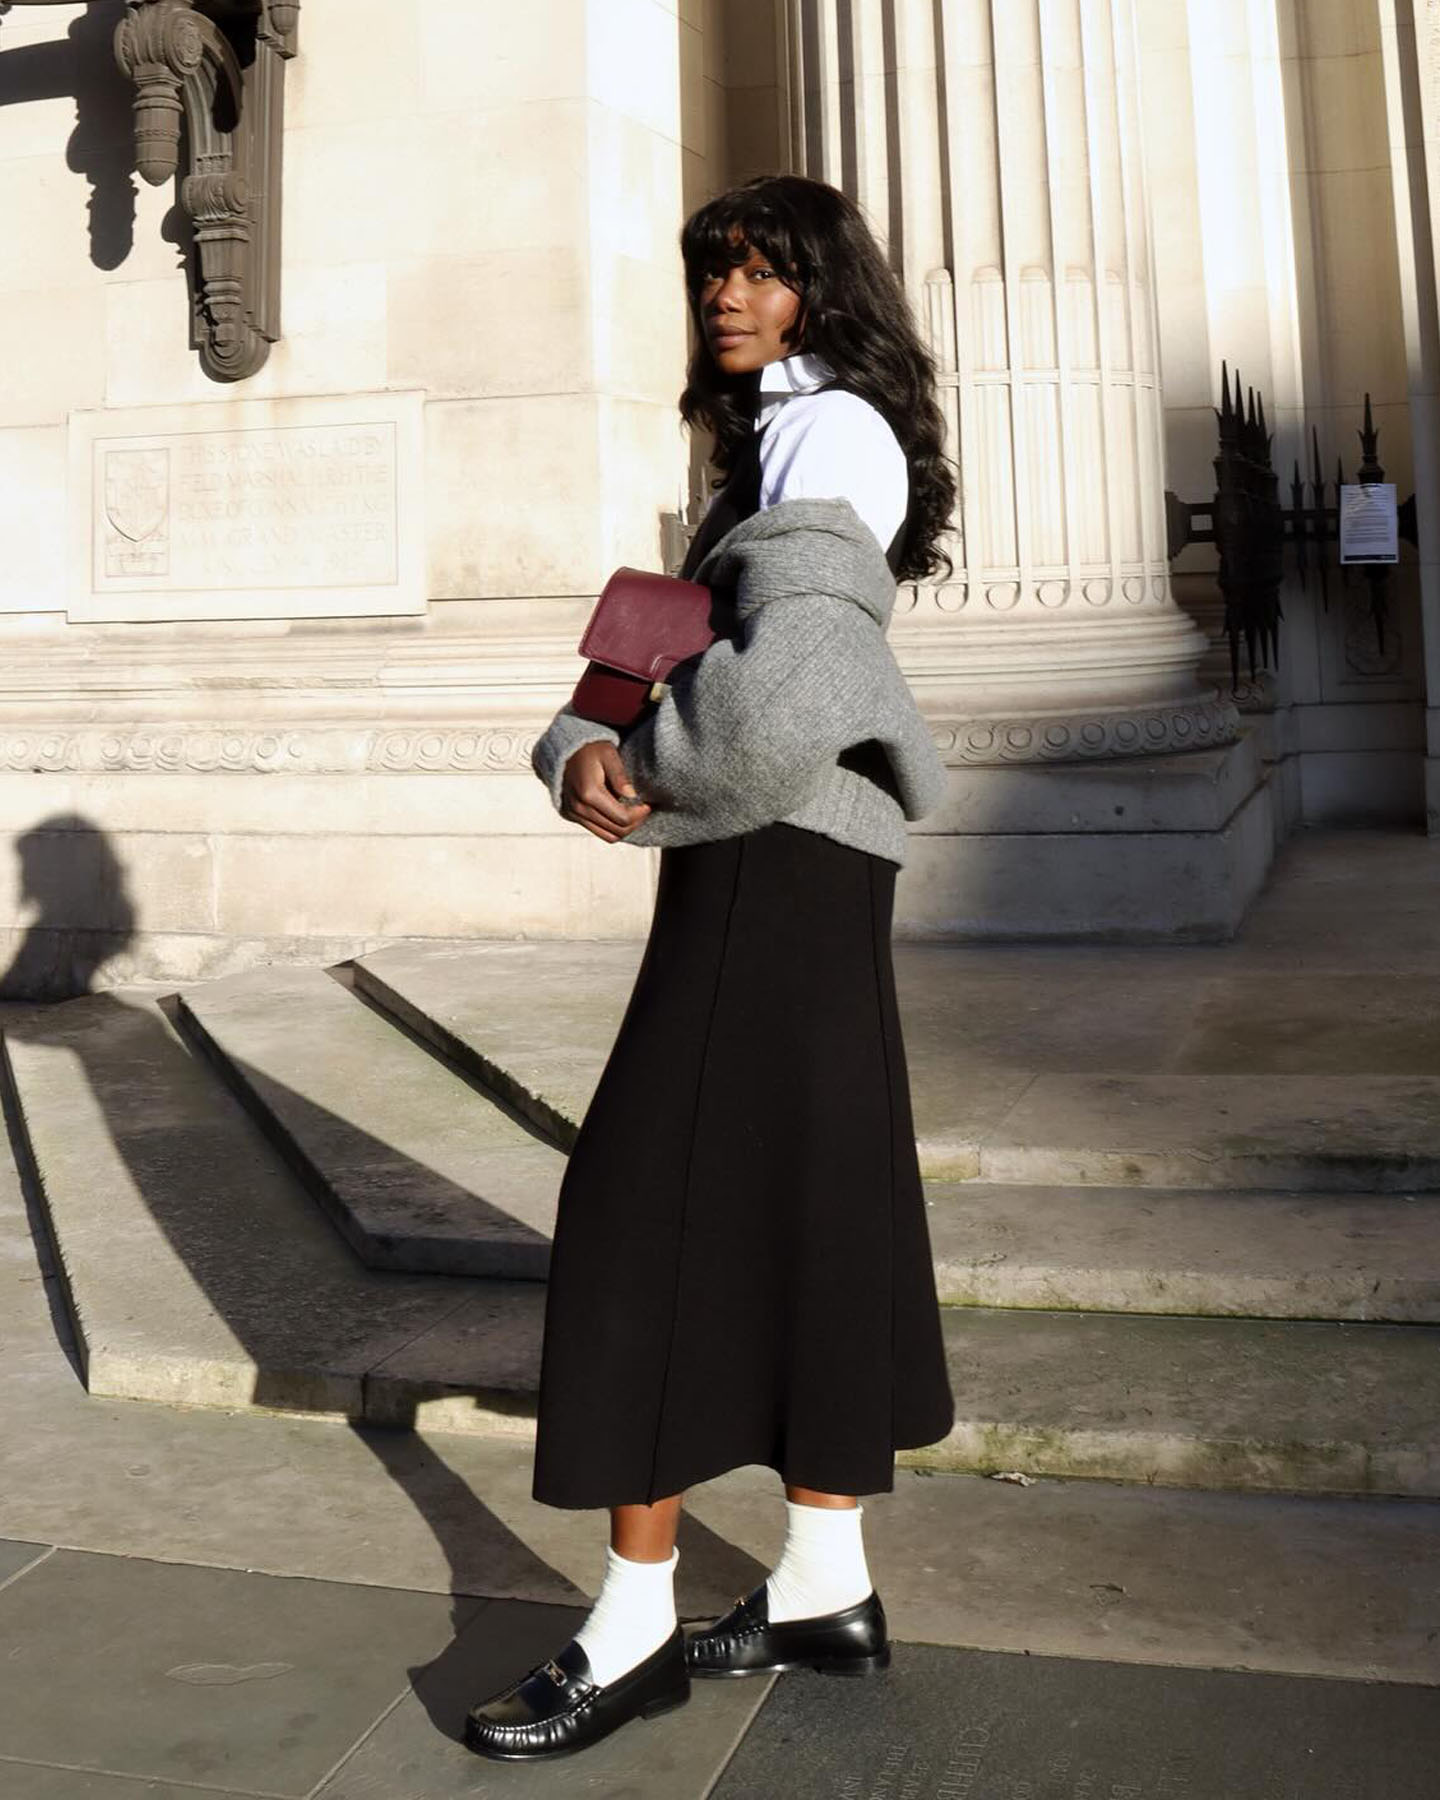 French fashion influencer Andi Mun poses on the streets of Paris in a white button-down shirt, gray sweater, burgundy bag, black skirt, white ankle socks, and black loafers